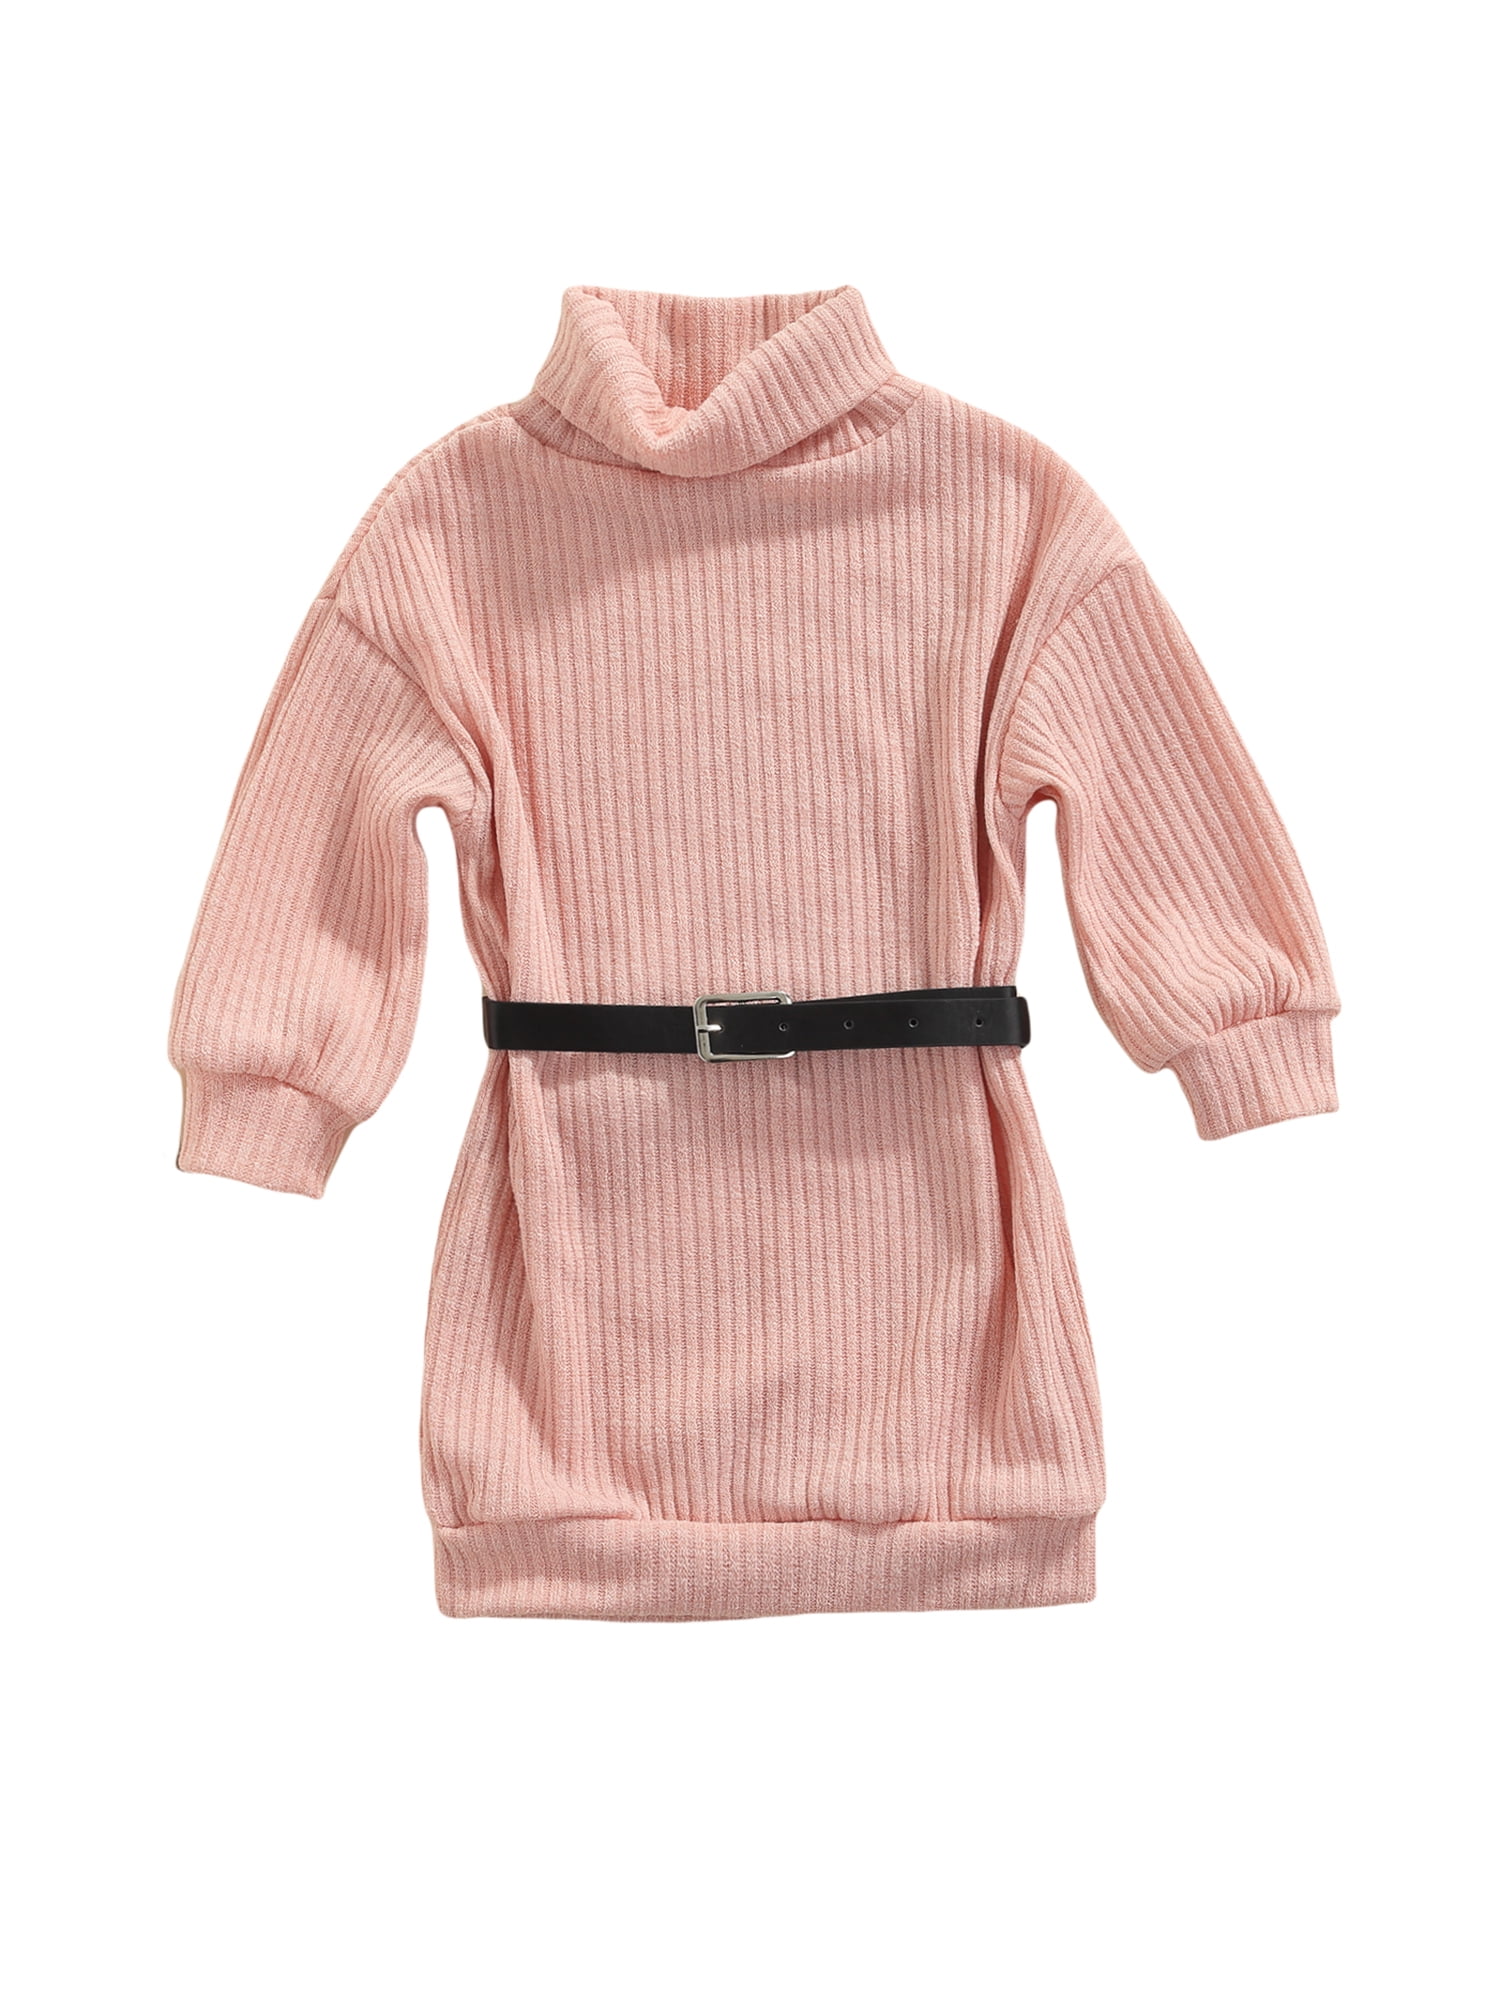 Toddler Girl Solid Ribbed Long-sleeve Pink Dress